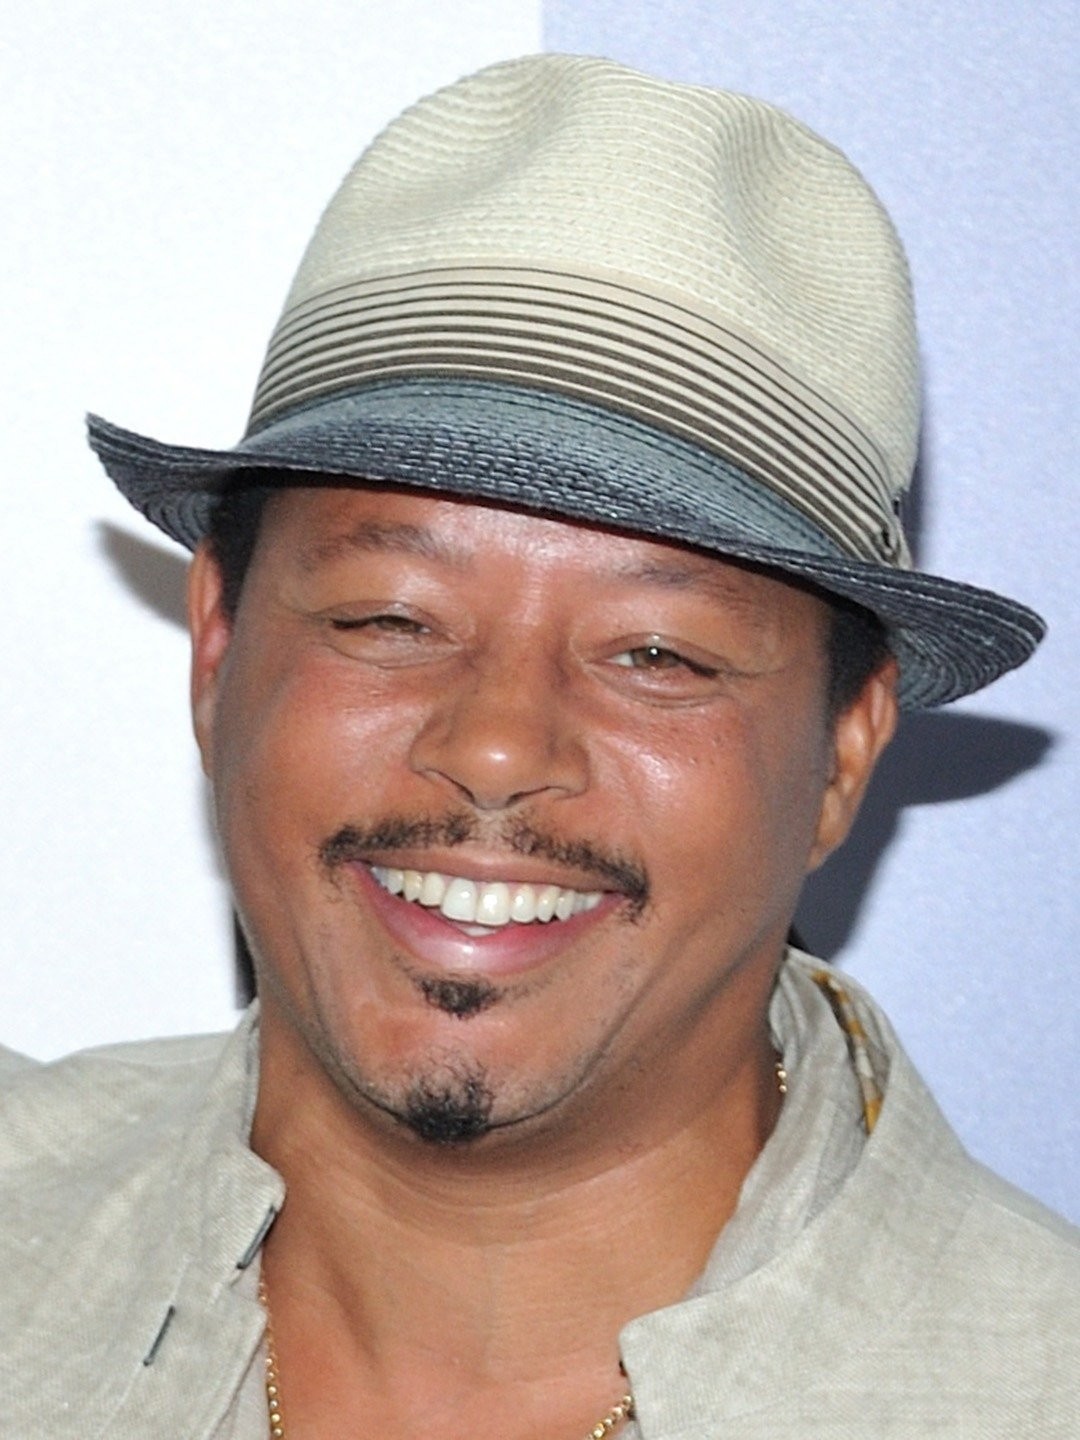 Terrence Howard, Star of 'The Butler,' Is an Actor With a Dark Past